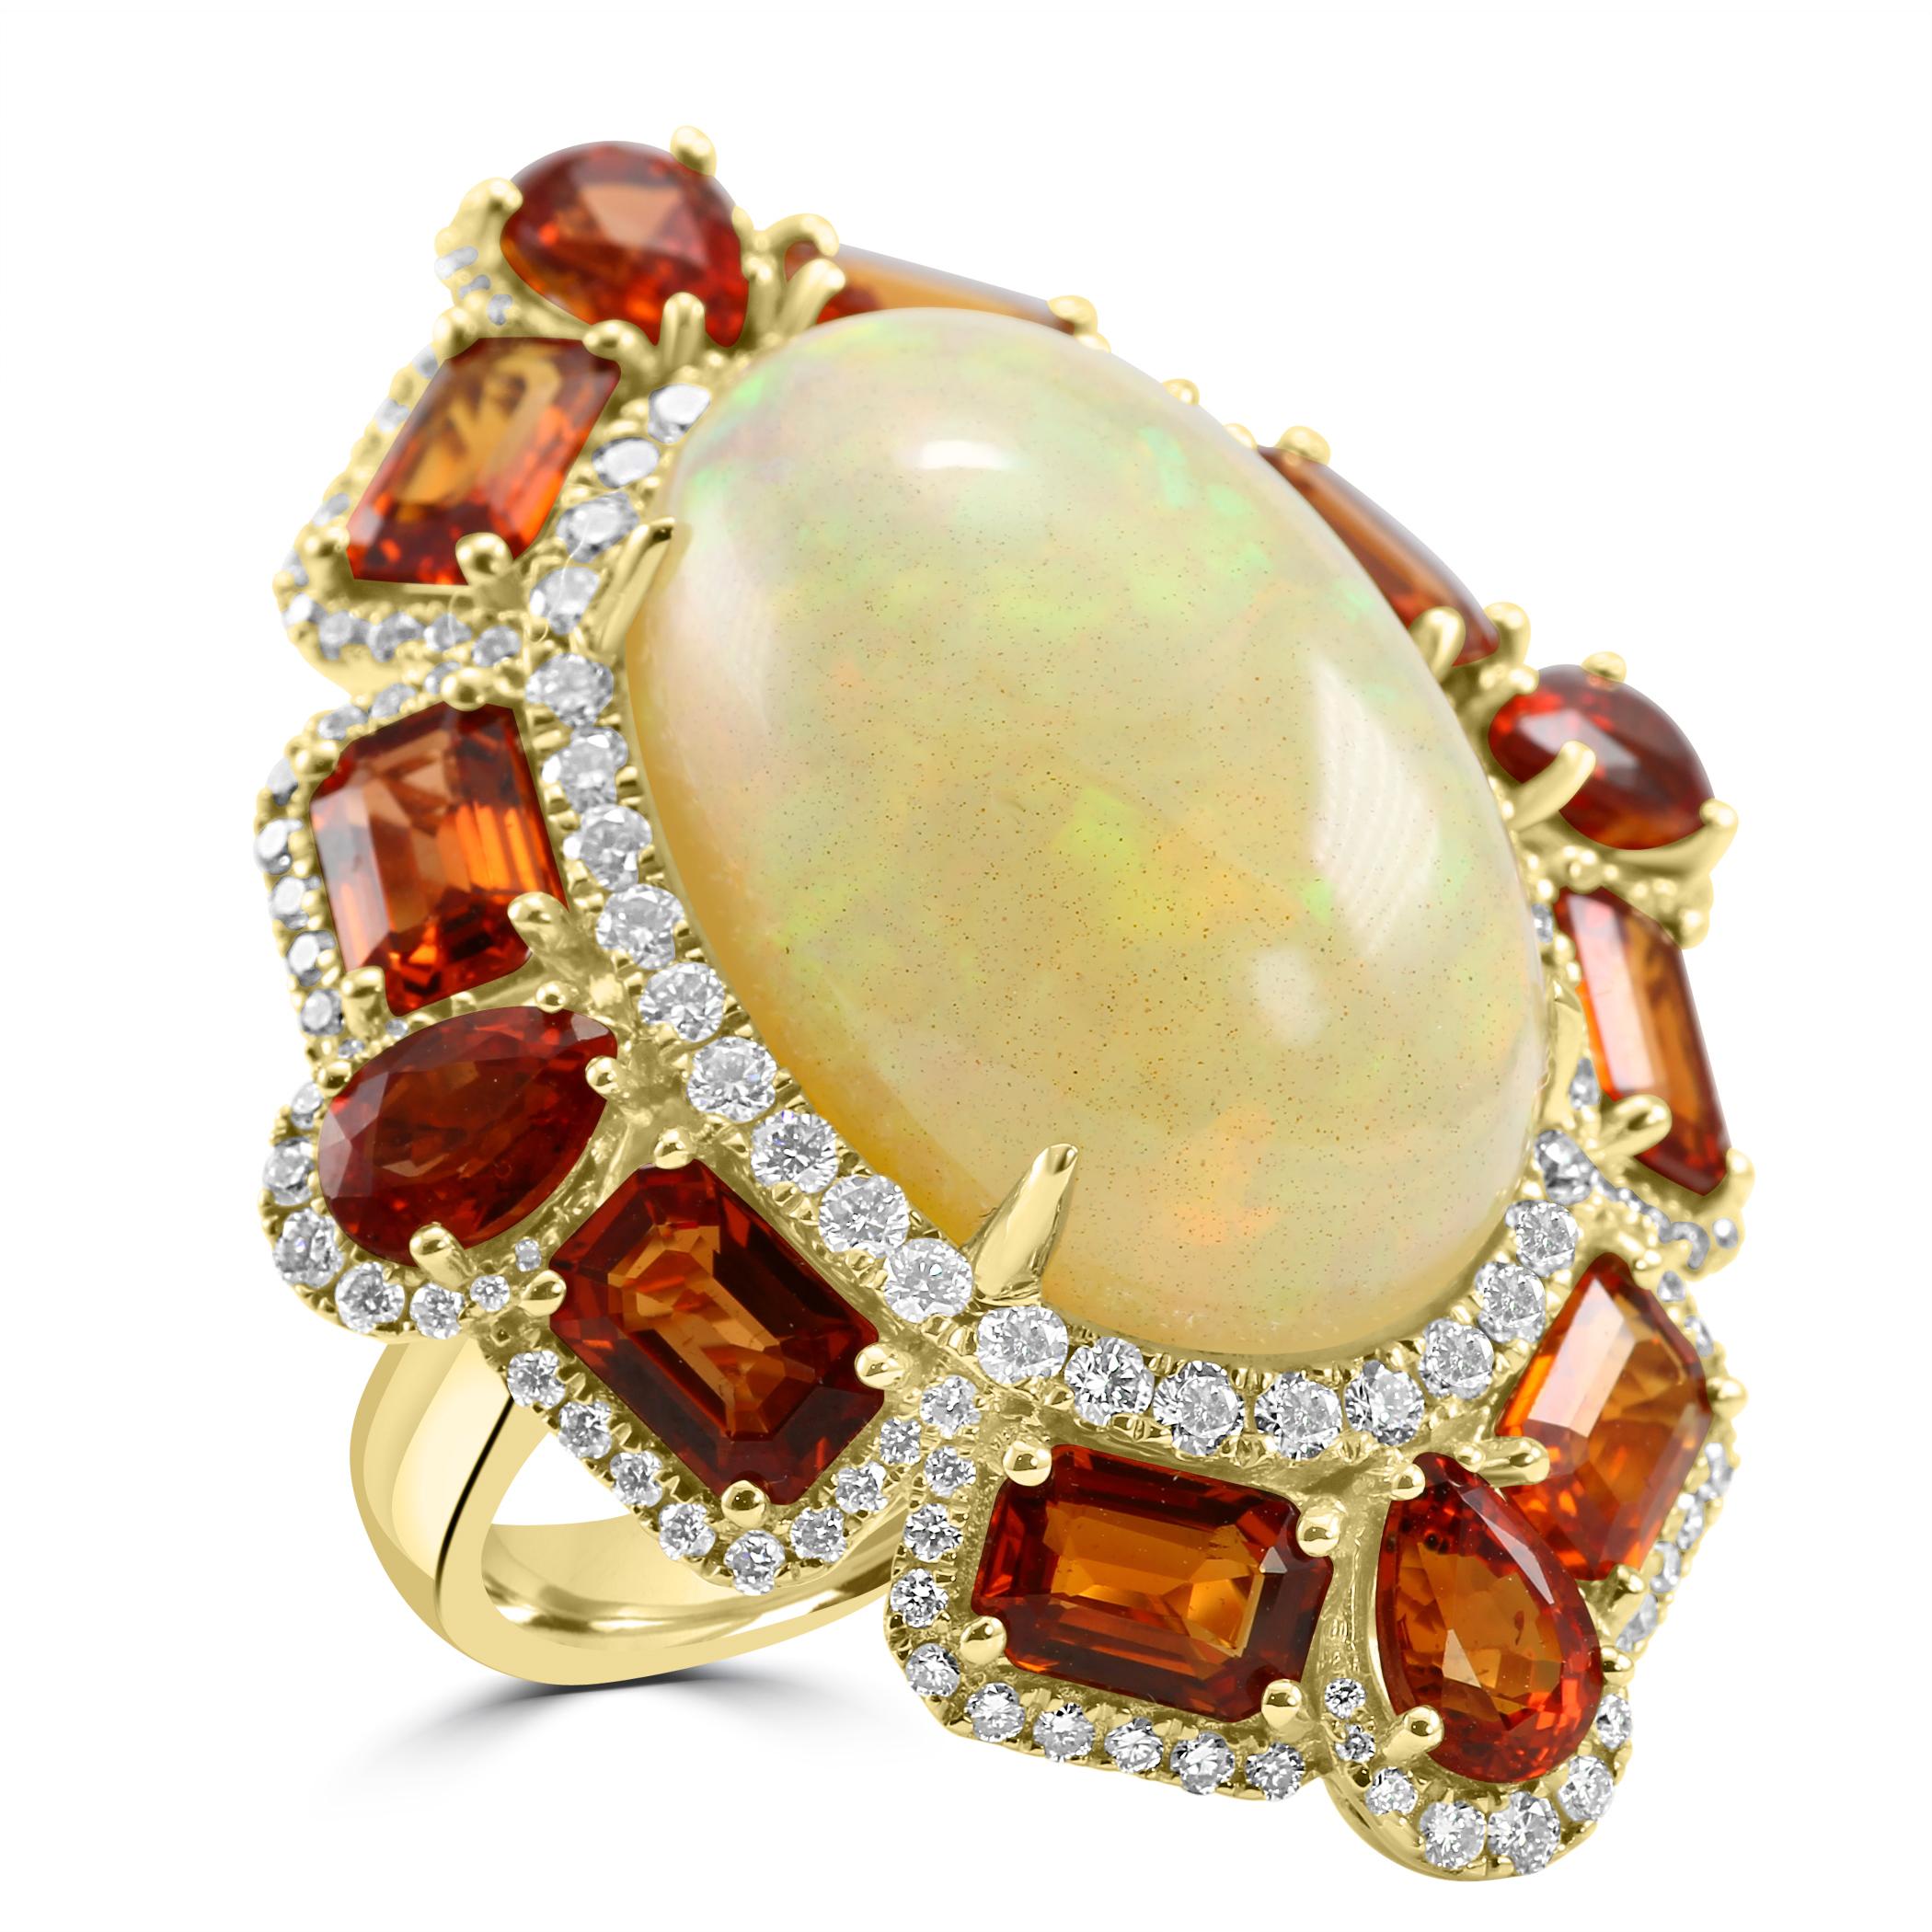 At the center of this exquisite ring lies a magnificent Opal, carefully selected for its impressive size and mesmerizing play of colors. With a weight of 13.06 carats, this opal showcases a captivating spectrum of hues, evoking a sense of wonder and